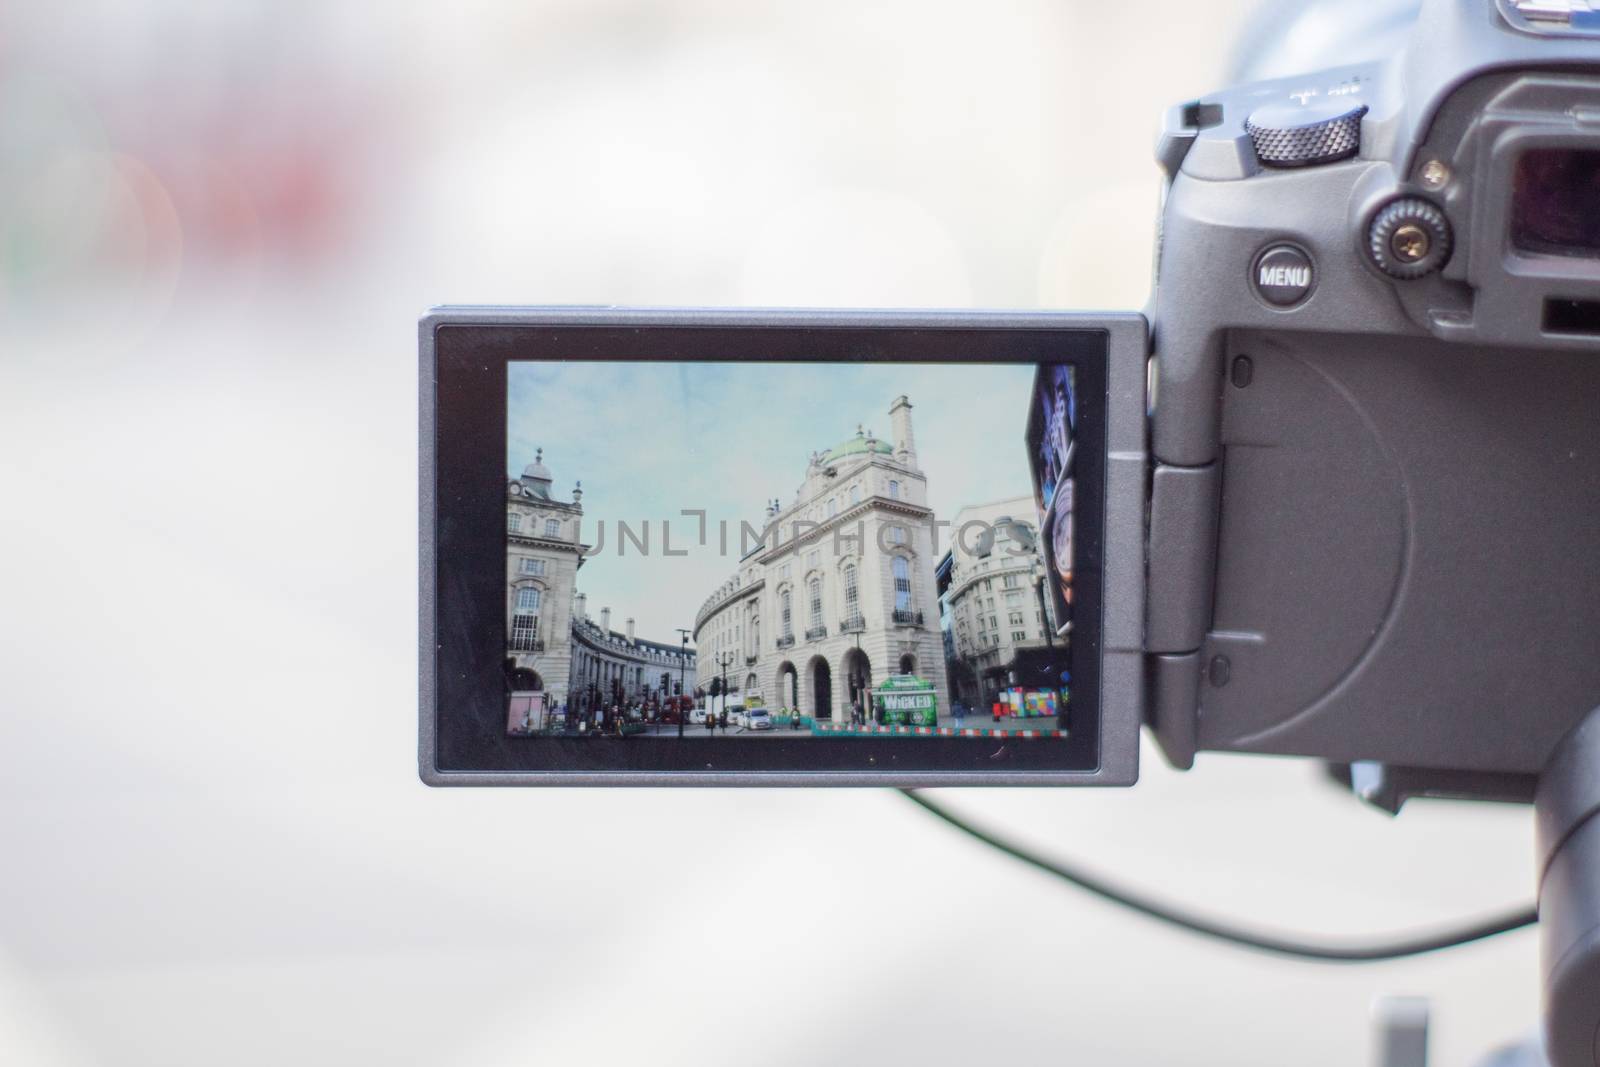 London, UK - February 14, 2020: Classic white buildings from Piccadilly Circus on screen of digital camera. Camera capturing a cityscape from London. Photography and video equipment